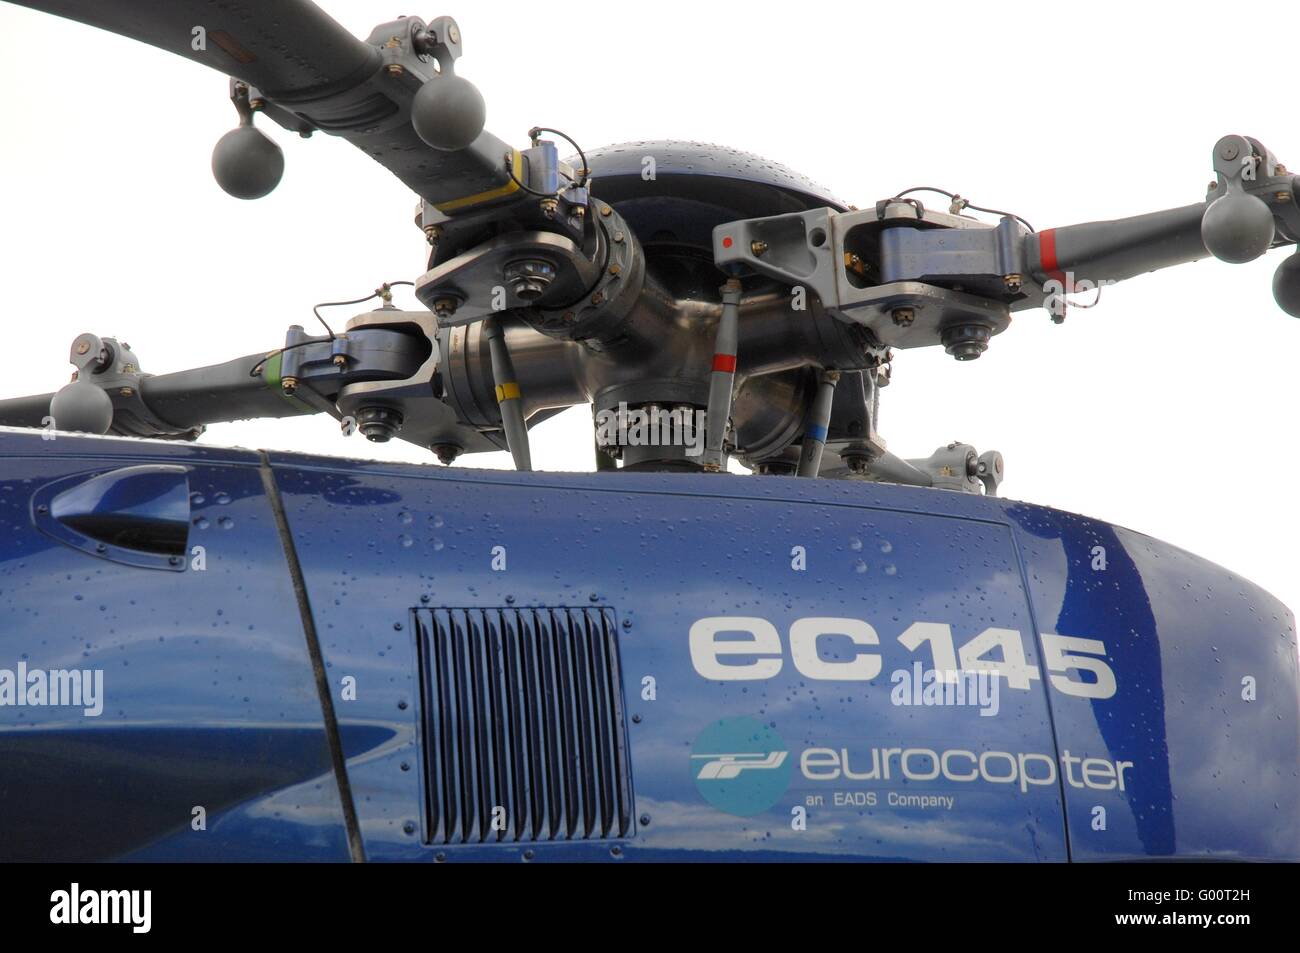 Suspension of a rotor Eurocopter Stock Photo